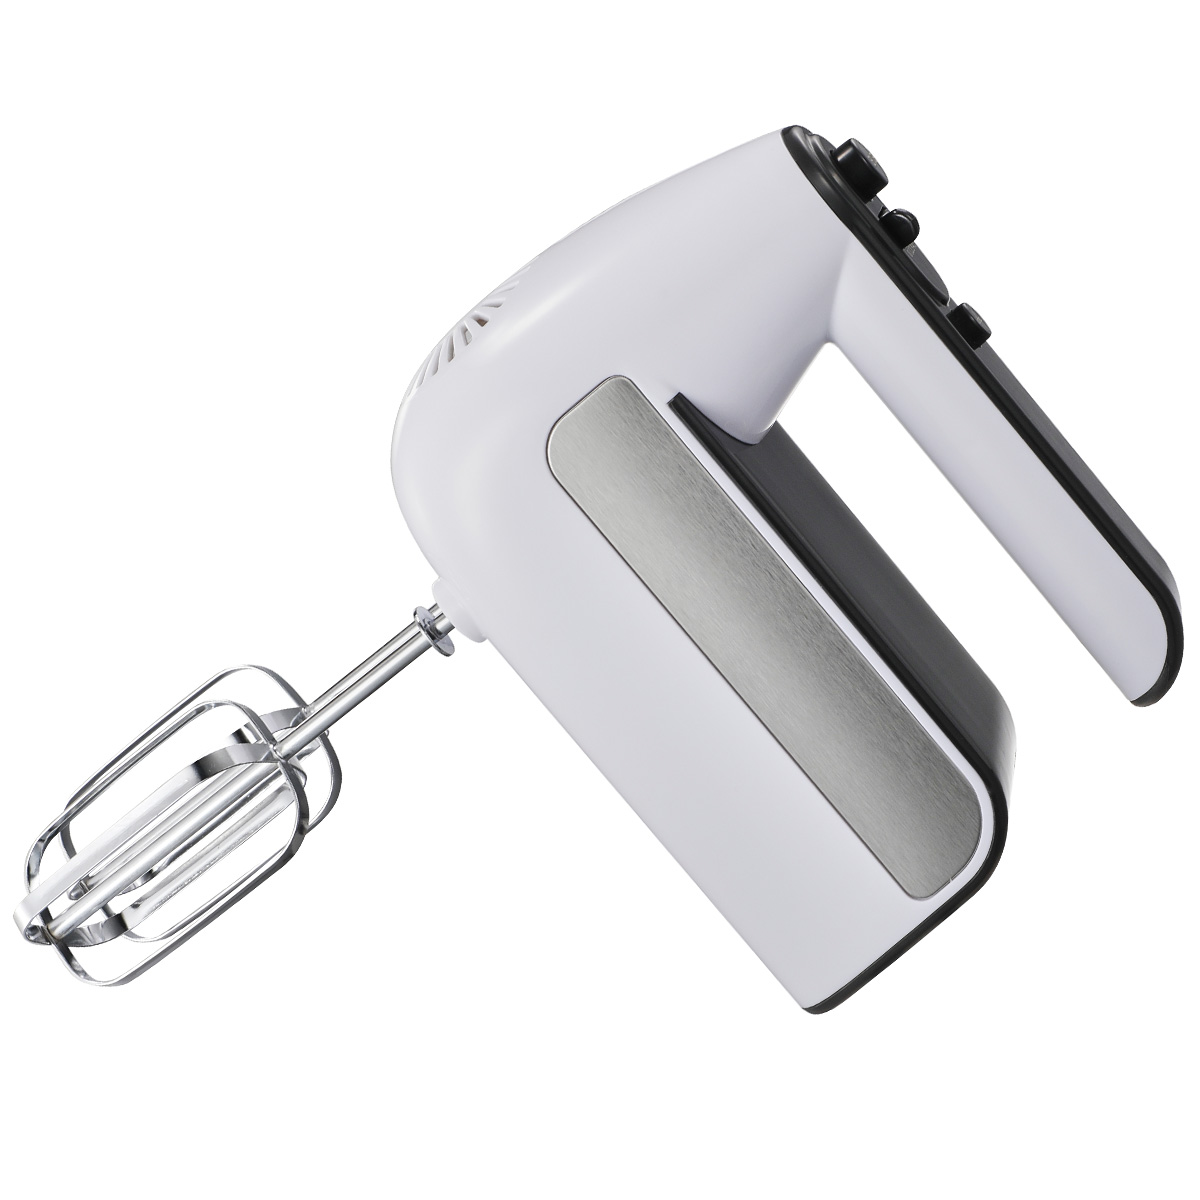 2-in-1 Stand & Hand Mixer